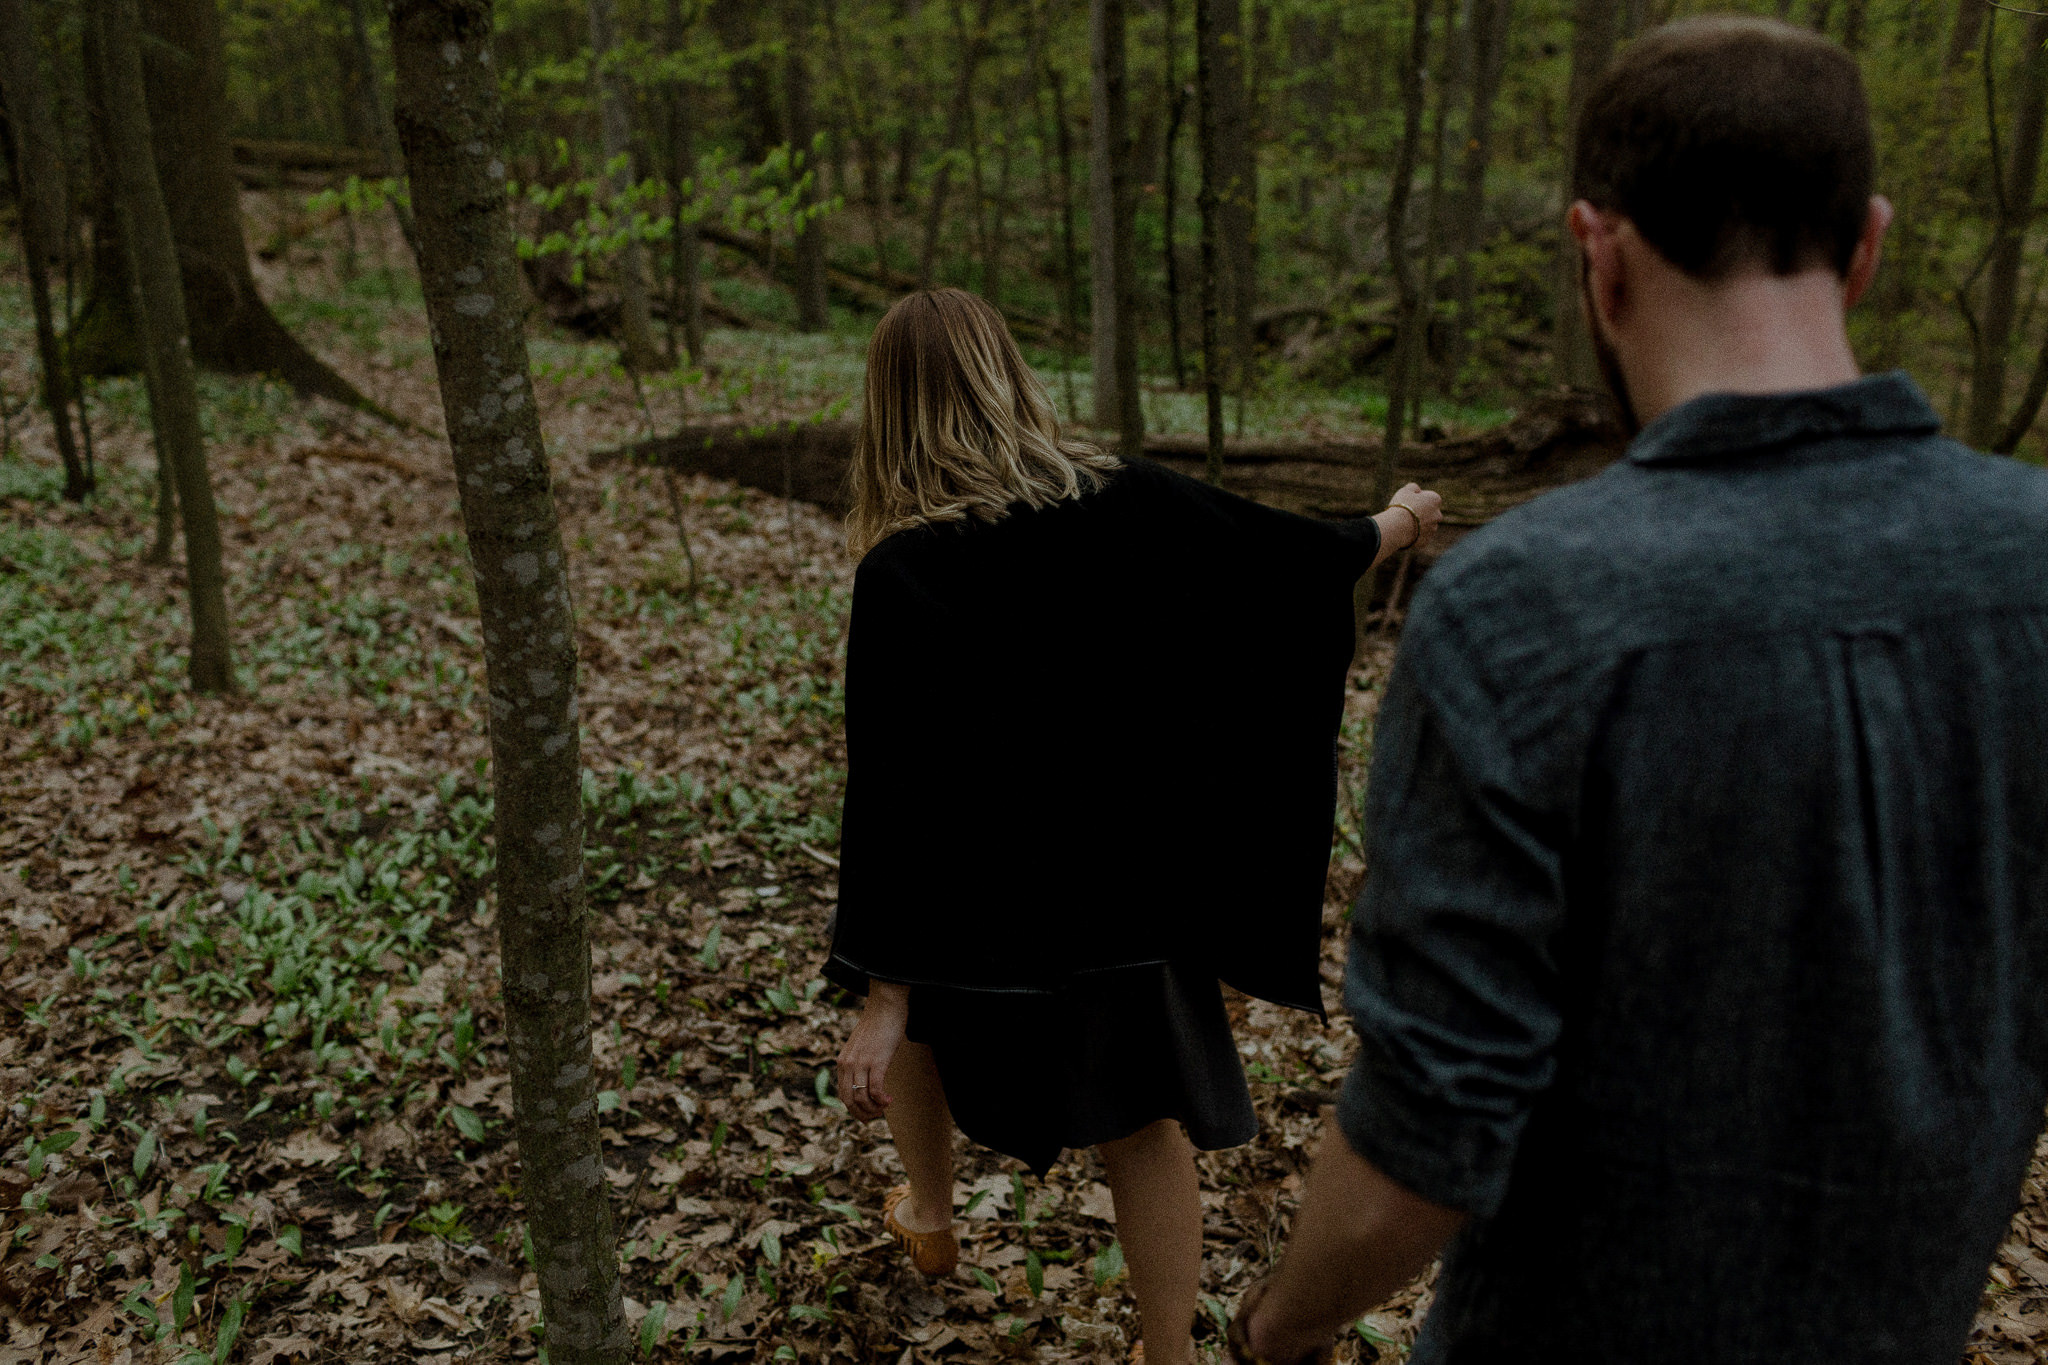 Couple hiking through woods, different engagement photoshoot